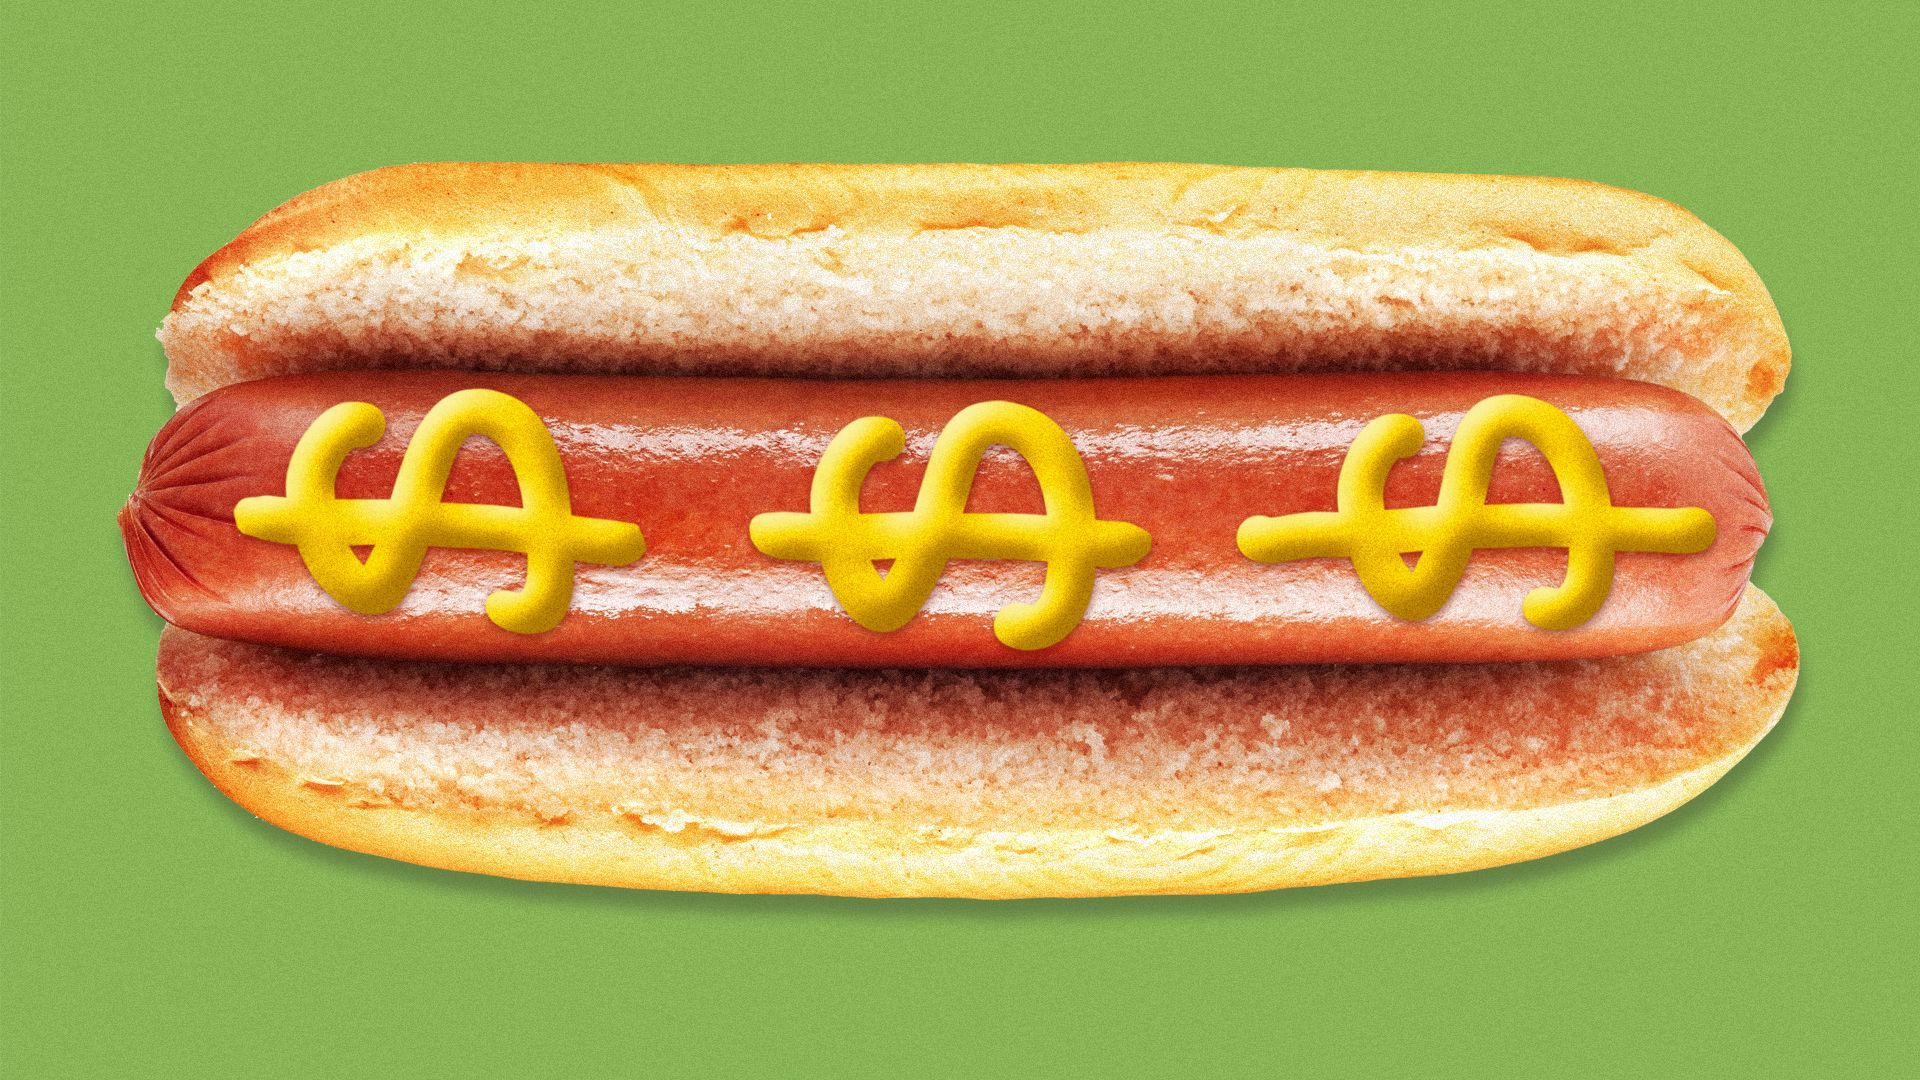 Illustration of a hot dog with mustard in the shape of dollar signs.